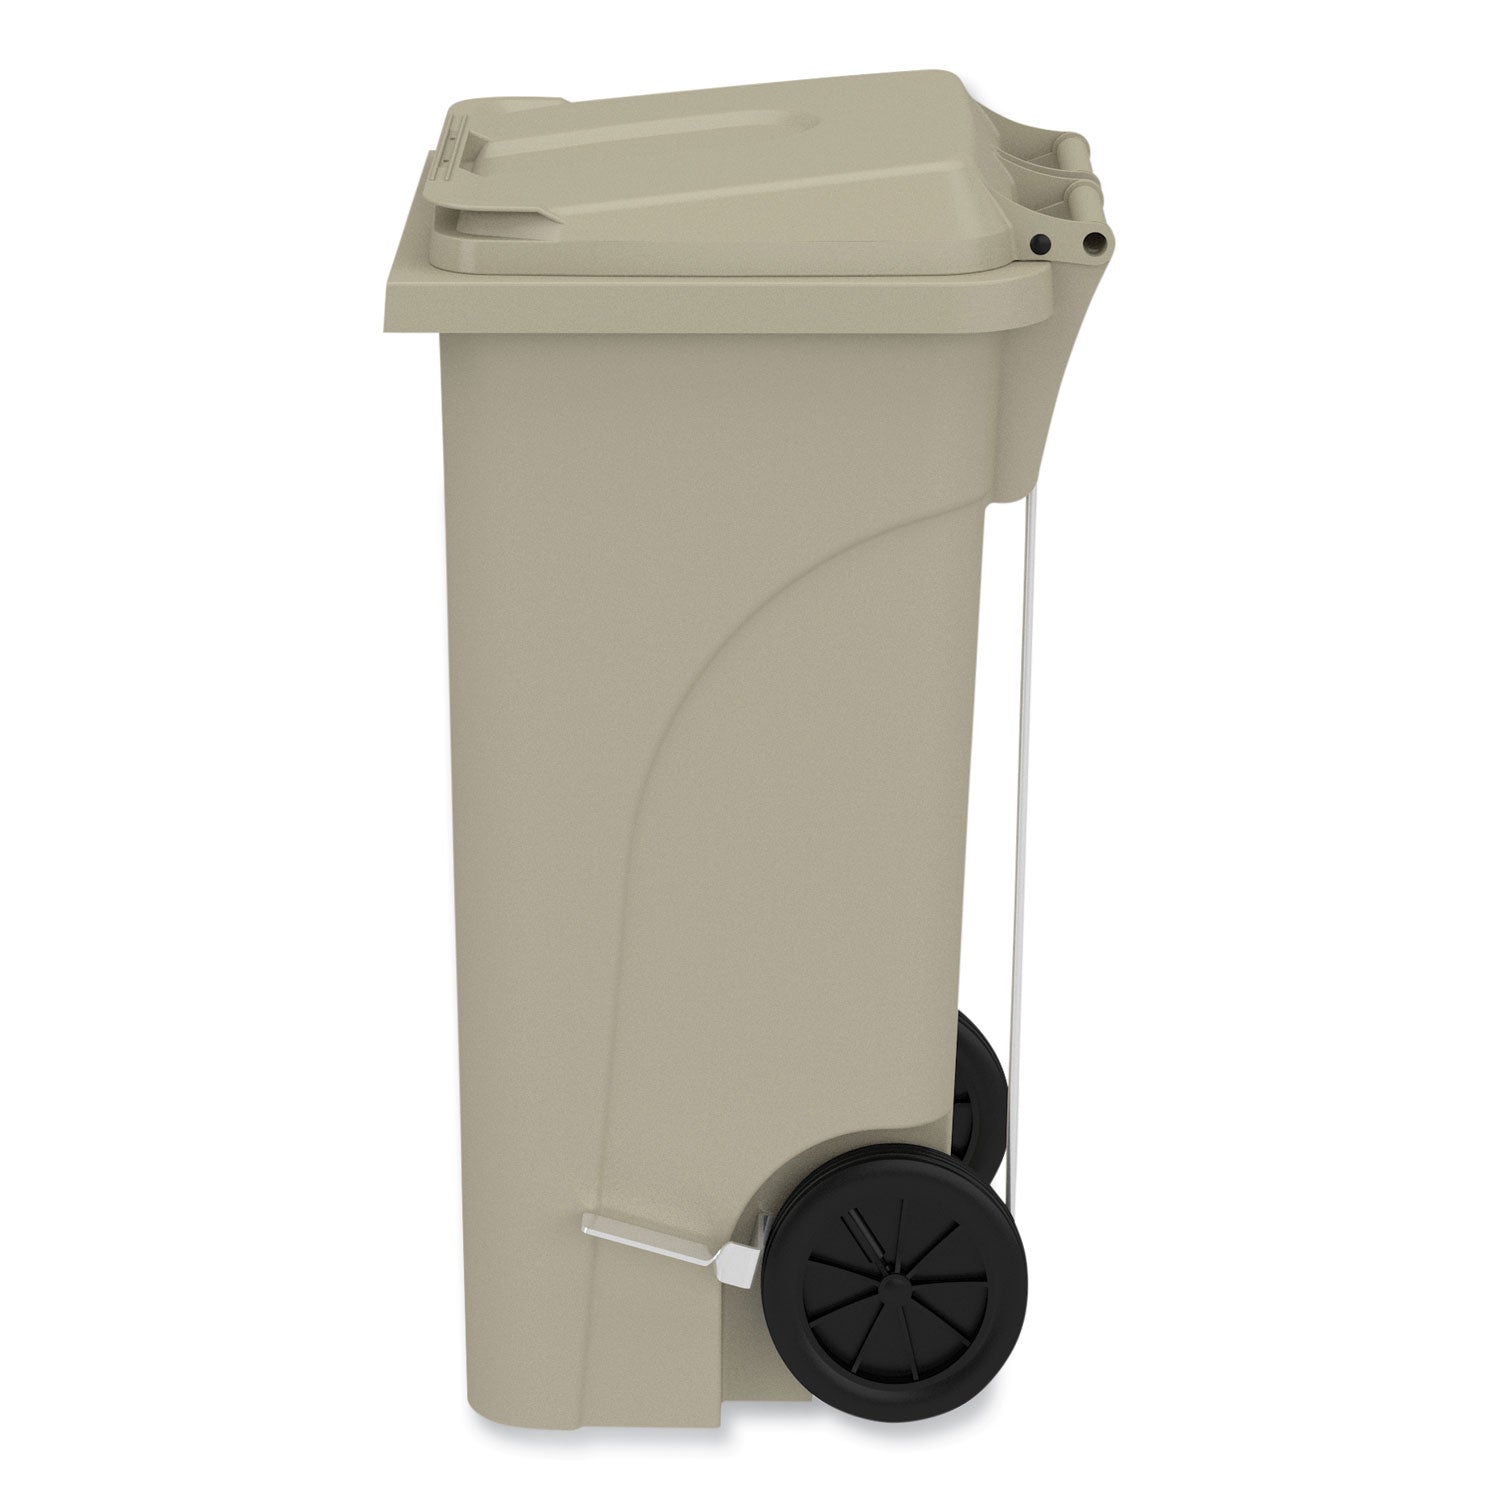 Safco 32 Gallon Plastic Step-On Receptacle - 32 gal Capacity - Foot Pedal, Lightweight, Easy to Clean, Handle, Wheels, Mobility - 37" Height x 21.3" Width x 20" Depth - Plastic - Tan - 1 Carton - 2